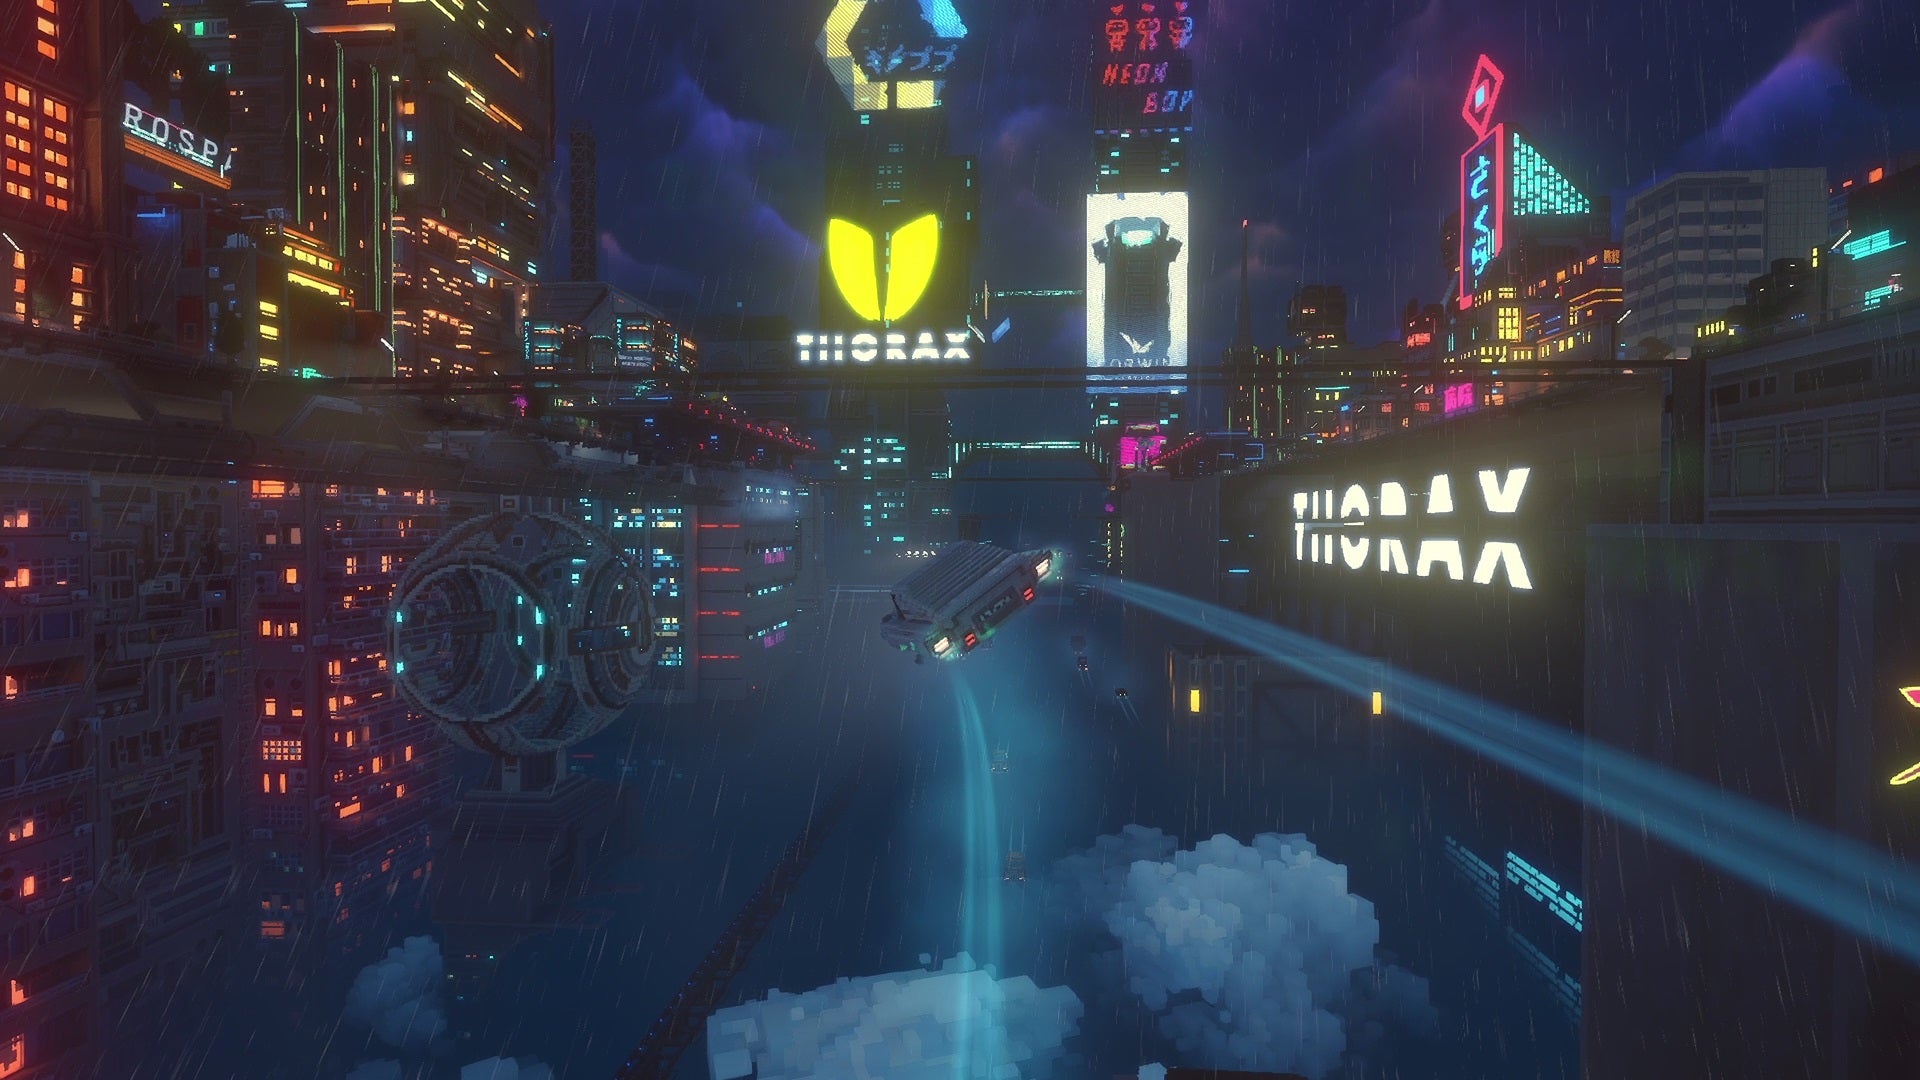 Cloudpunk - A flying car leaves neon tracks behind in the sky as it flies just above the cloud level in the nighttime city full of skyscrapers with neon lights and signs.